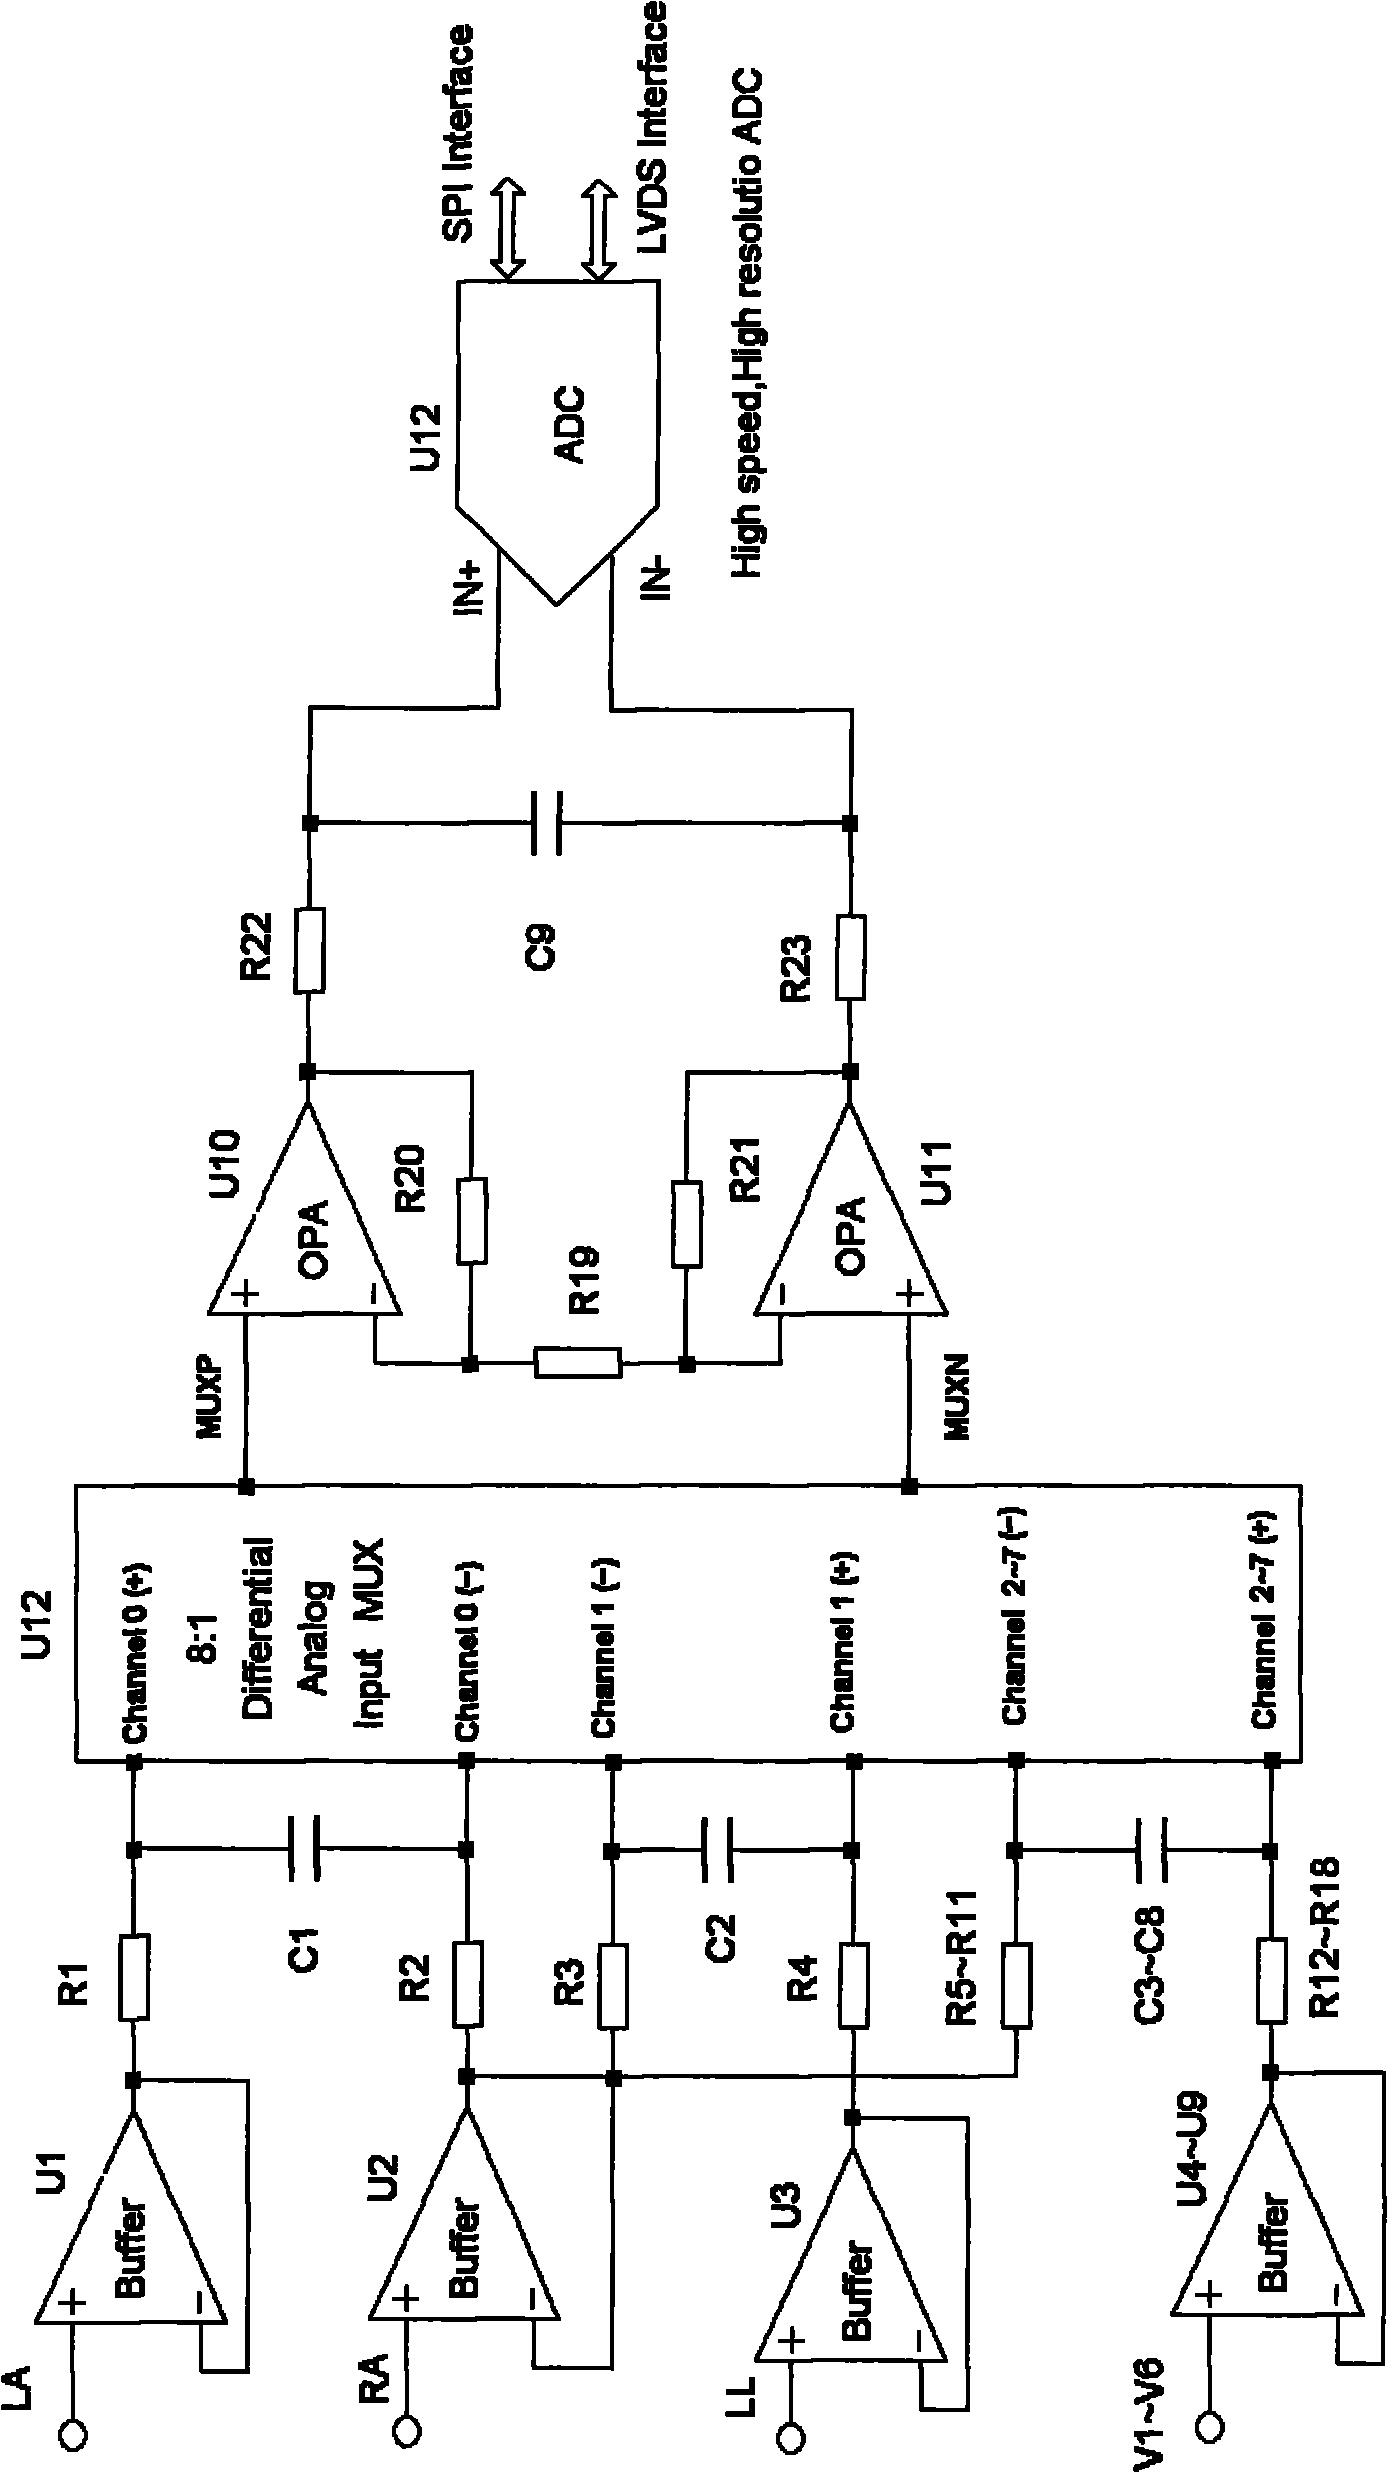 Full-differential same-phase parallel amplifying device for acquiring bioelectric signal